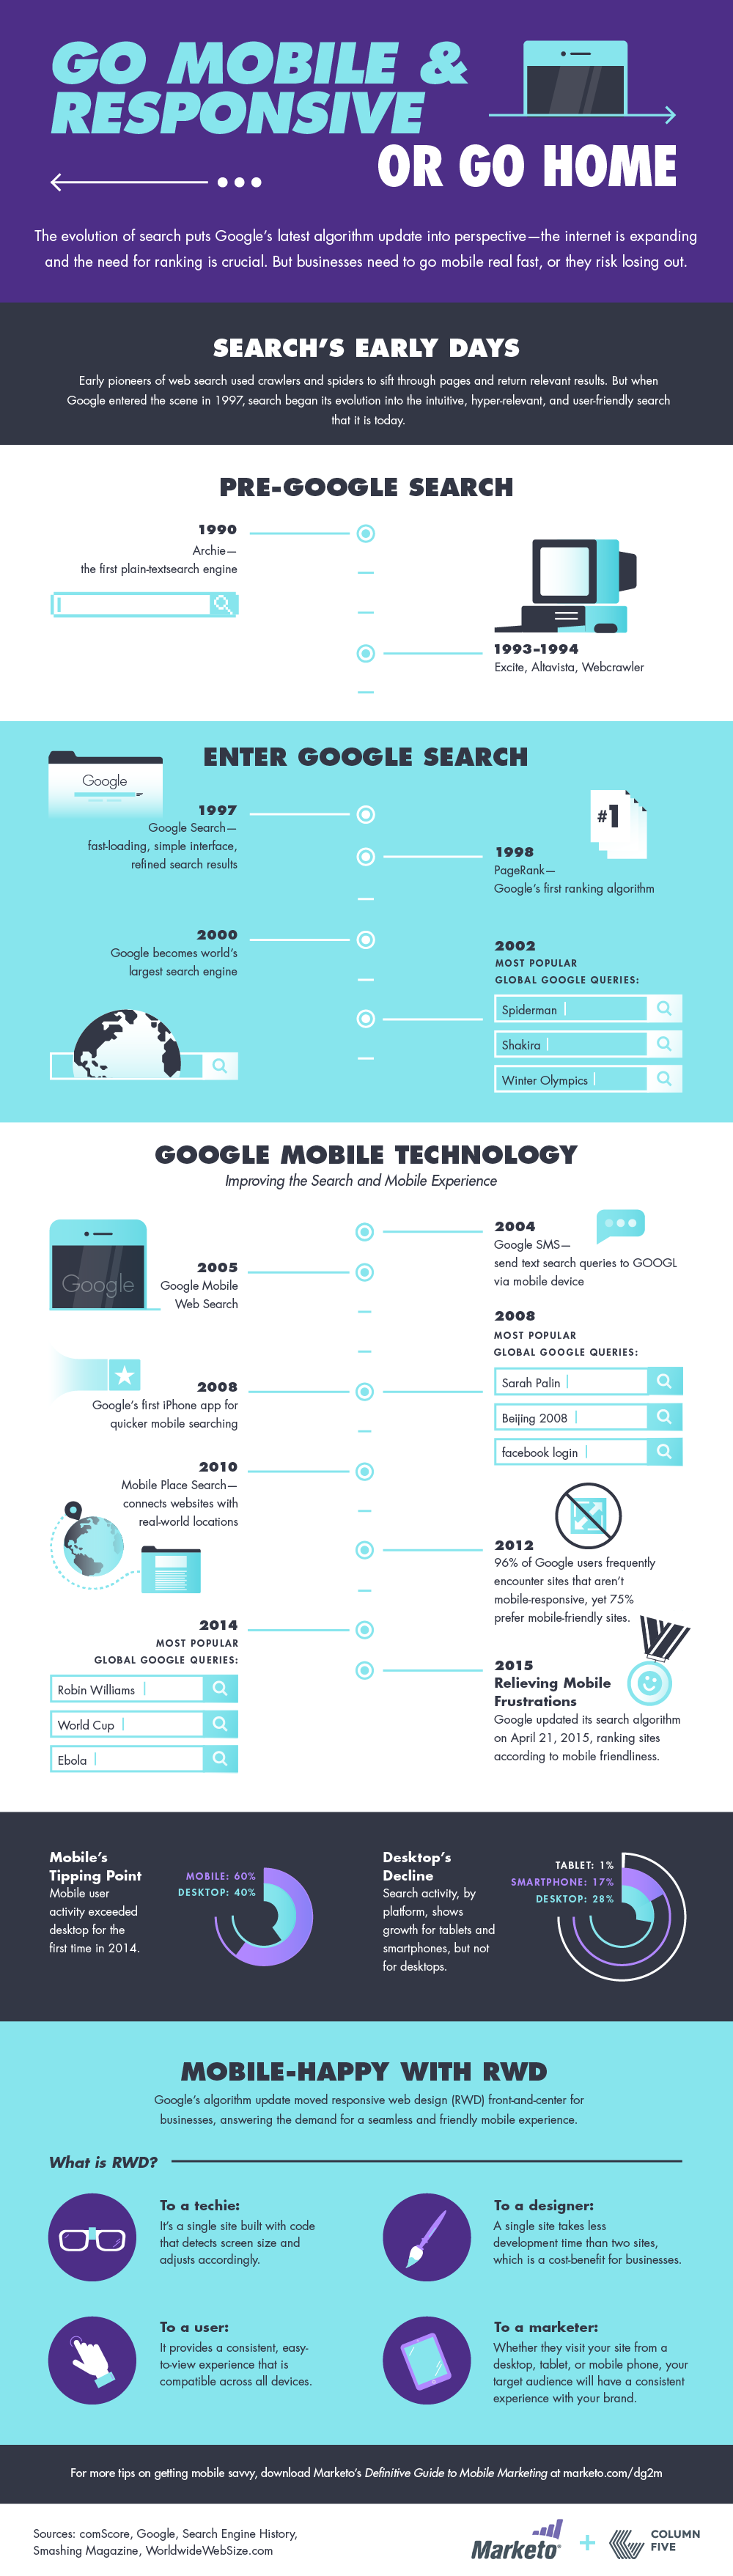 [Infographic] Go Mobile and Responsive...Or Go Home!